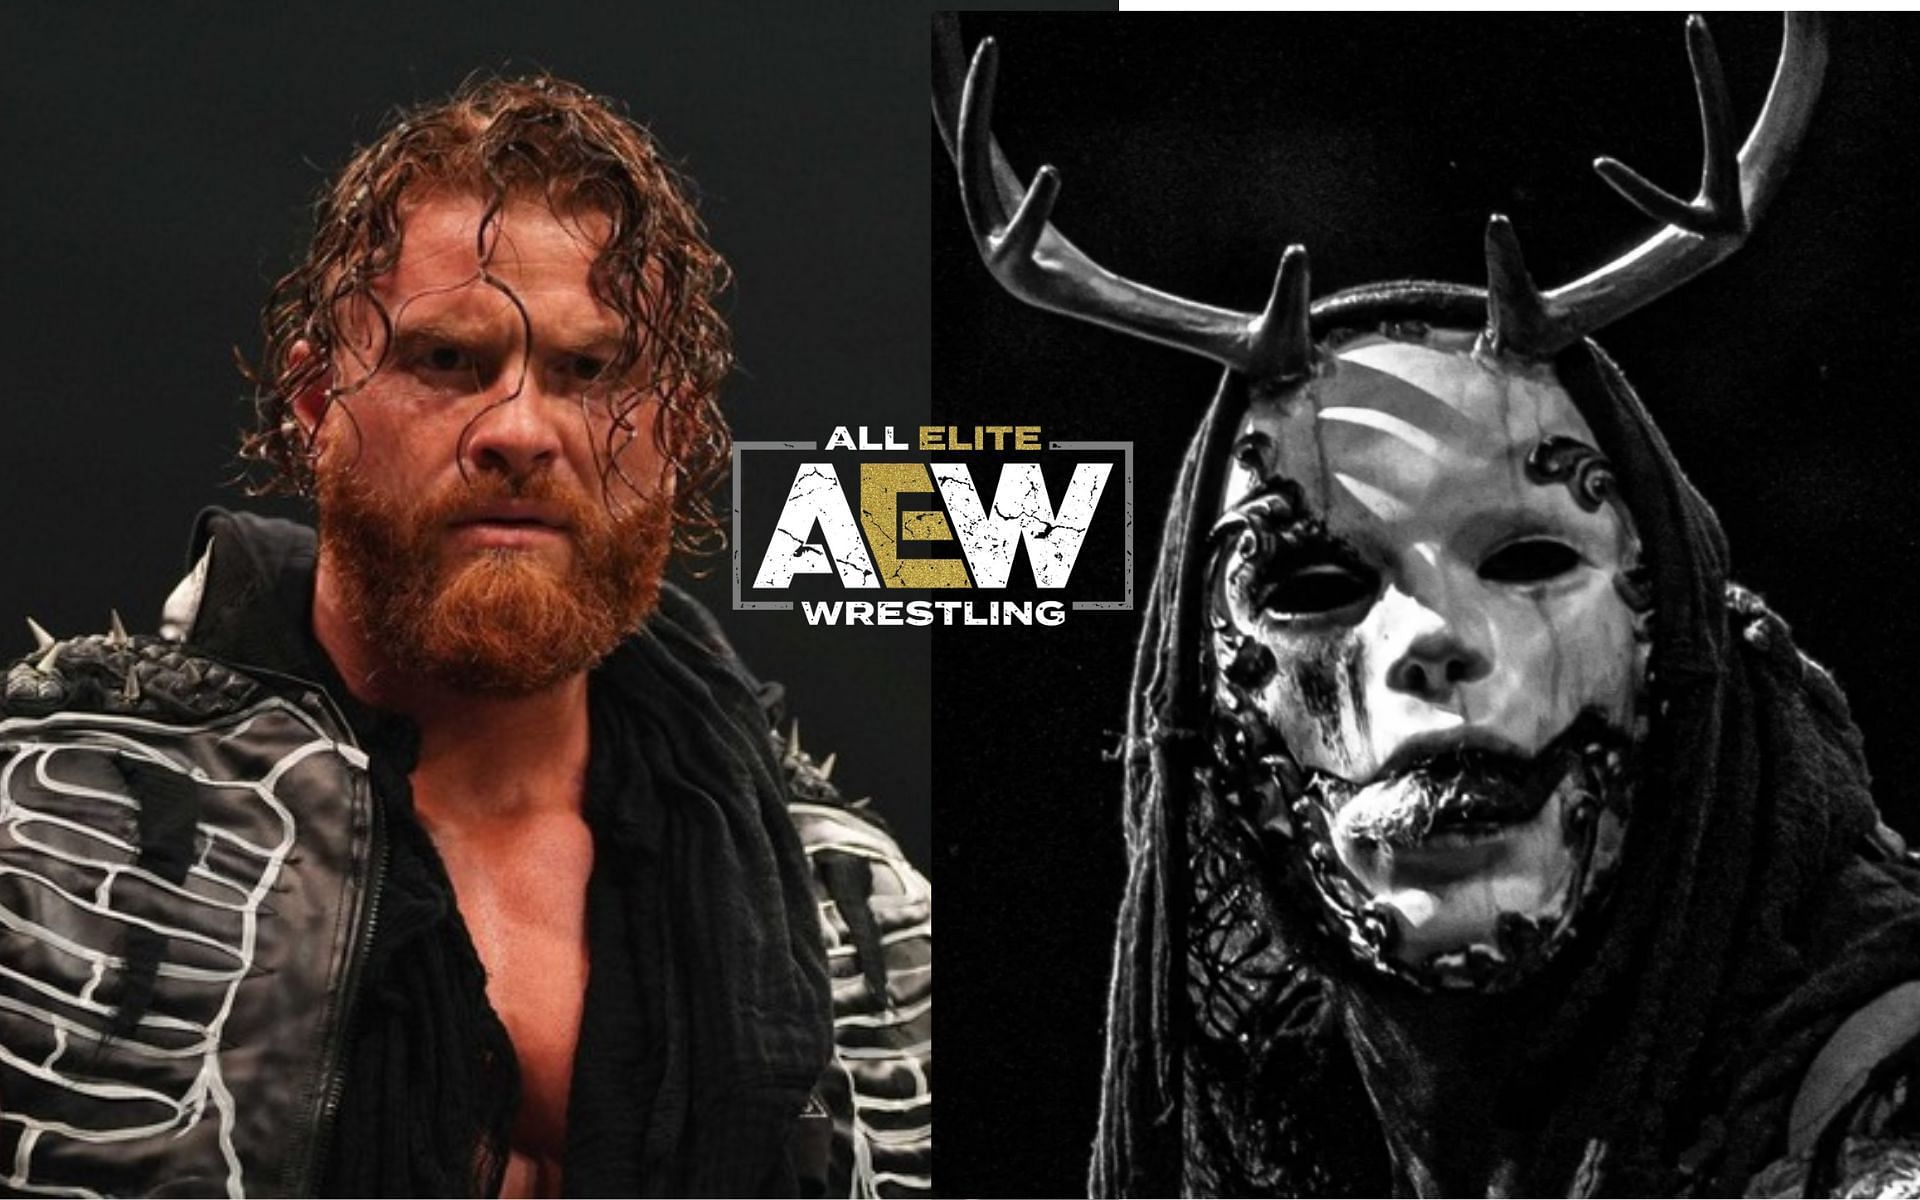 Buddy Mathews signed with AEW in February this year